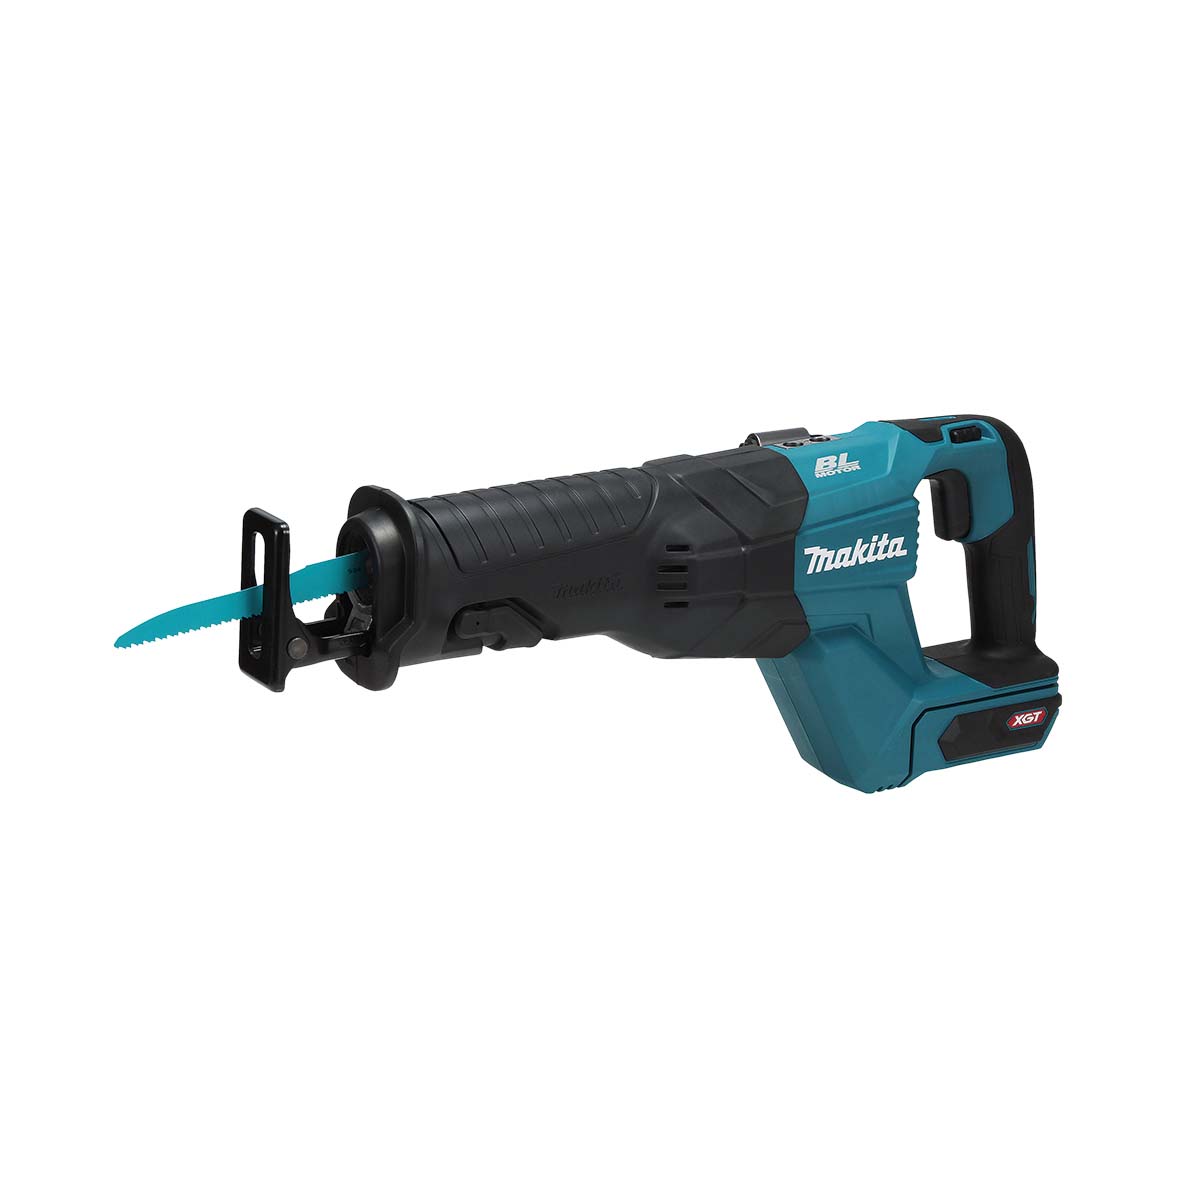 40V Brushless Recipro Saw Bare (Tool Only) JR001GZ by Makita